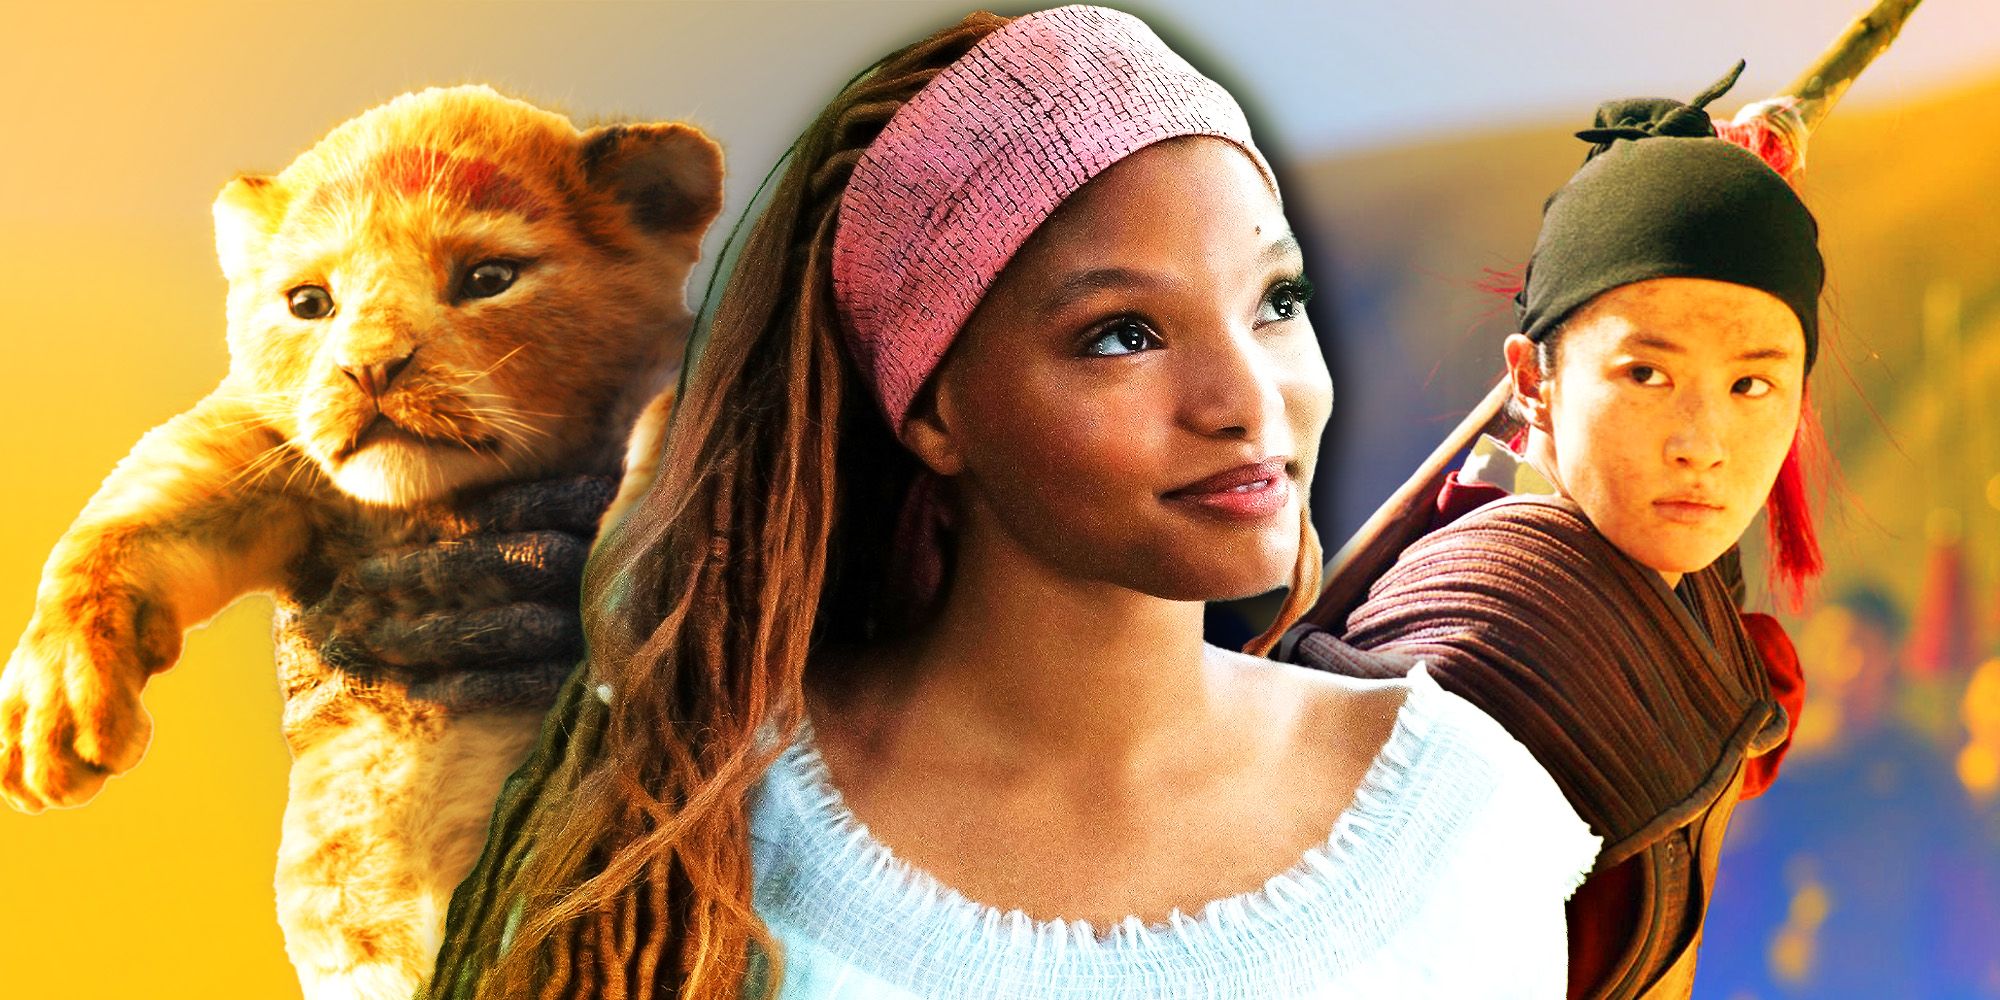 Disney live-action remakes collage: Simba (voice of JD McCrary) from The Lion King, Ariel (Halle Bailey) from Little Mermaid, Mulan (Liu Yifei) from Mulan